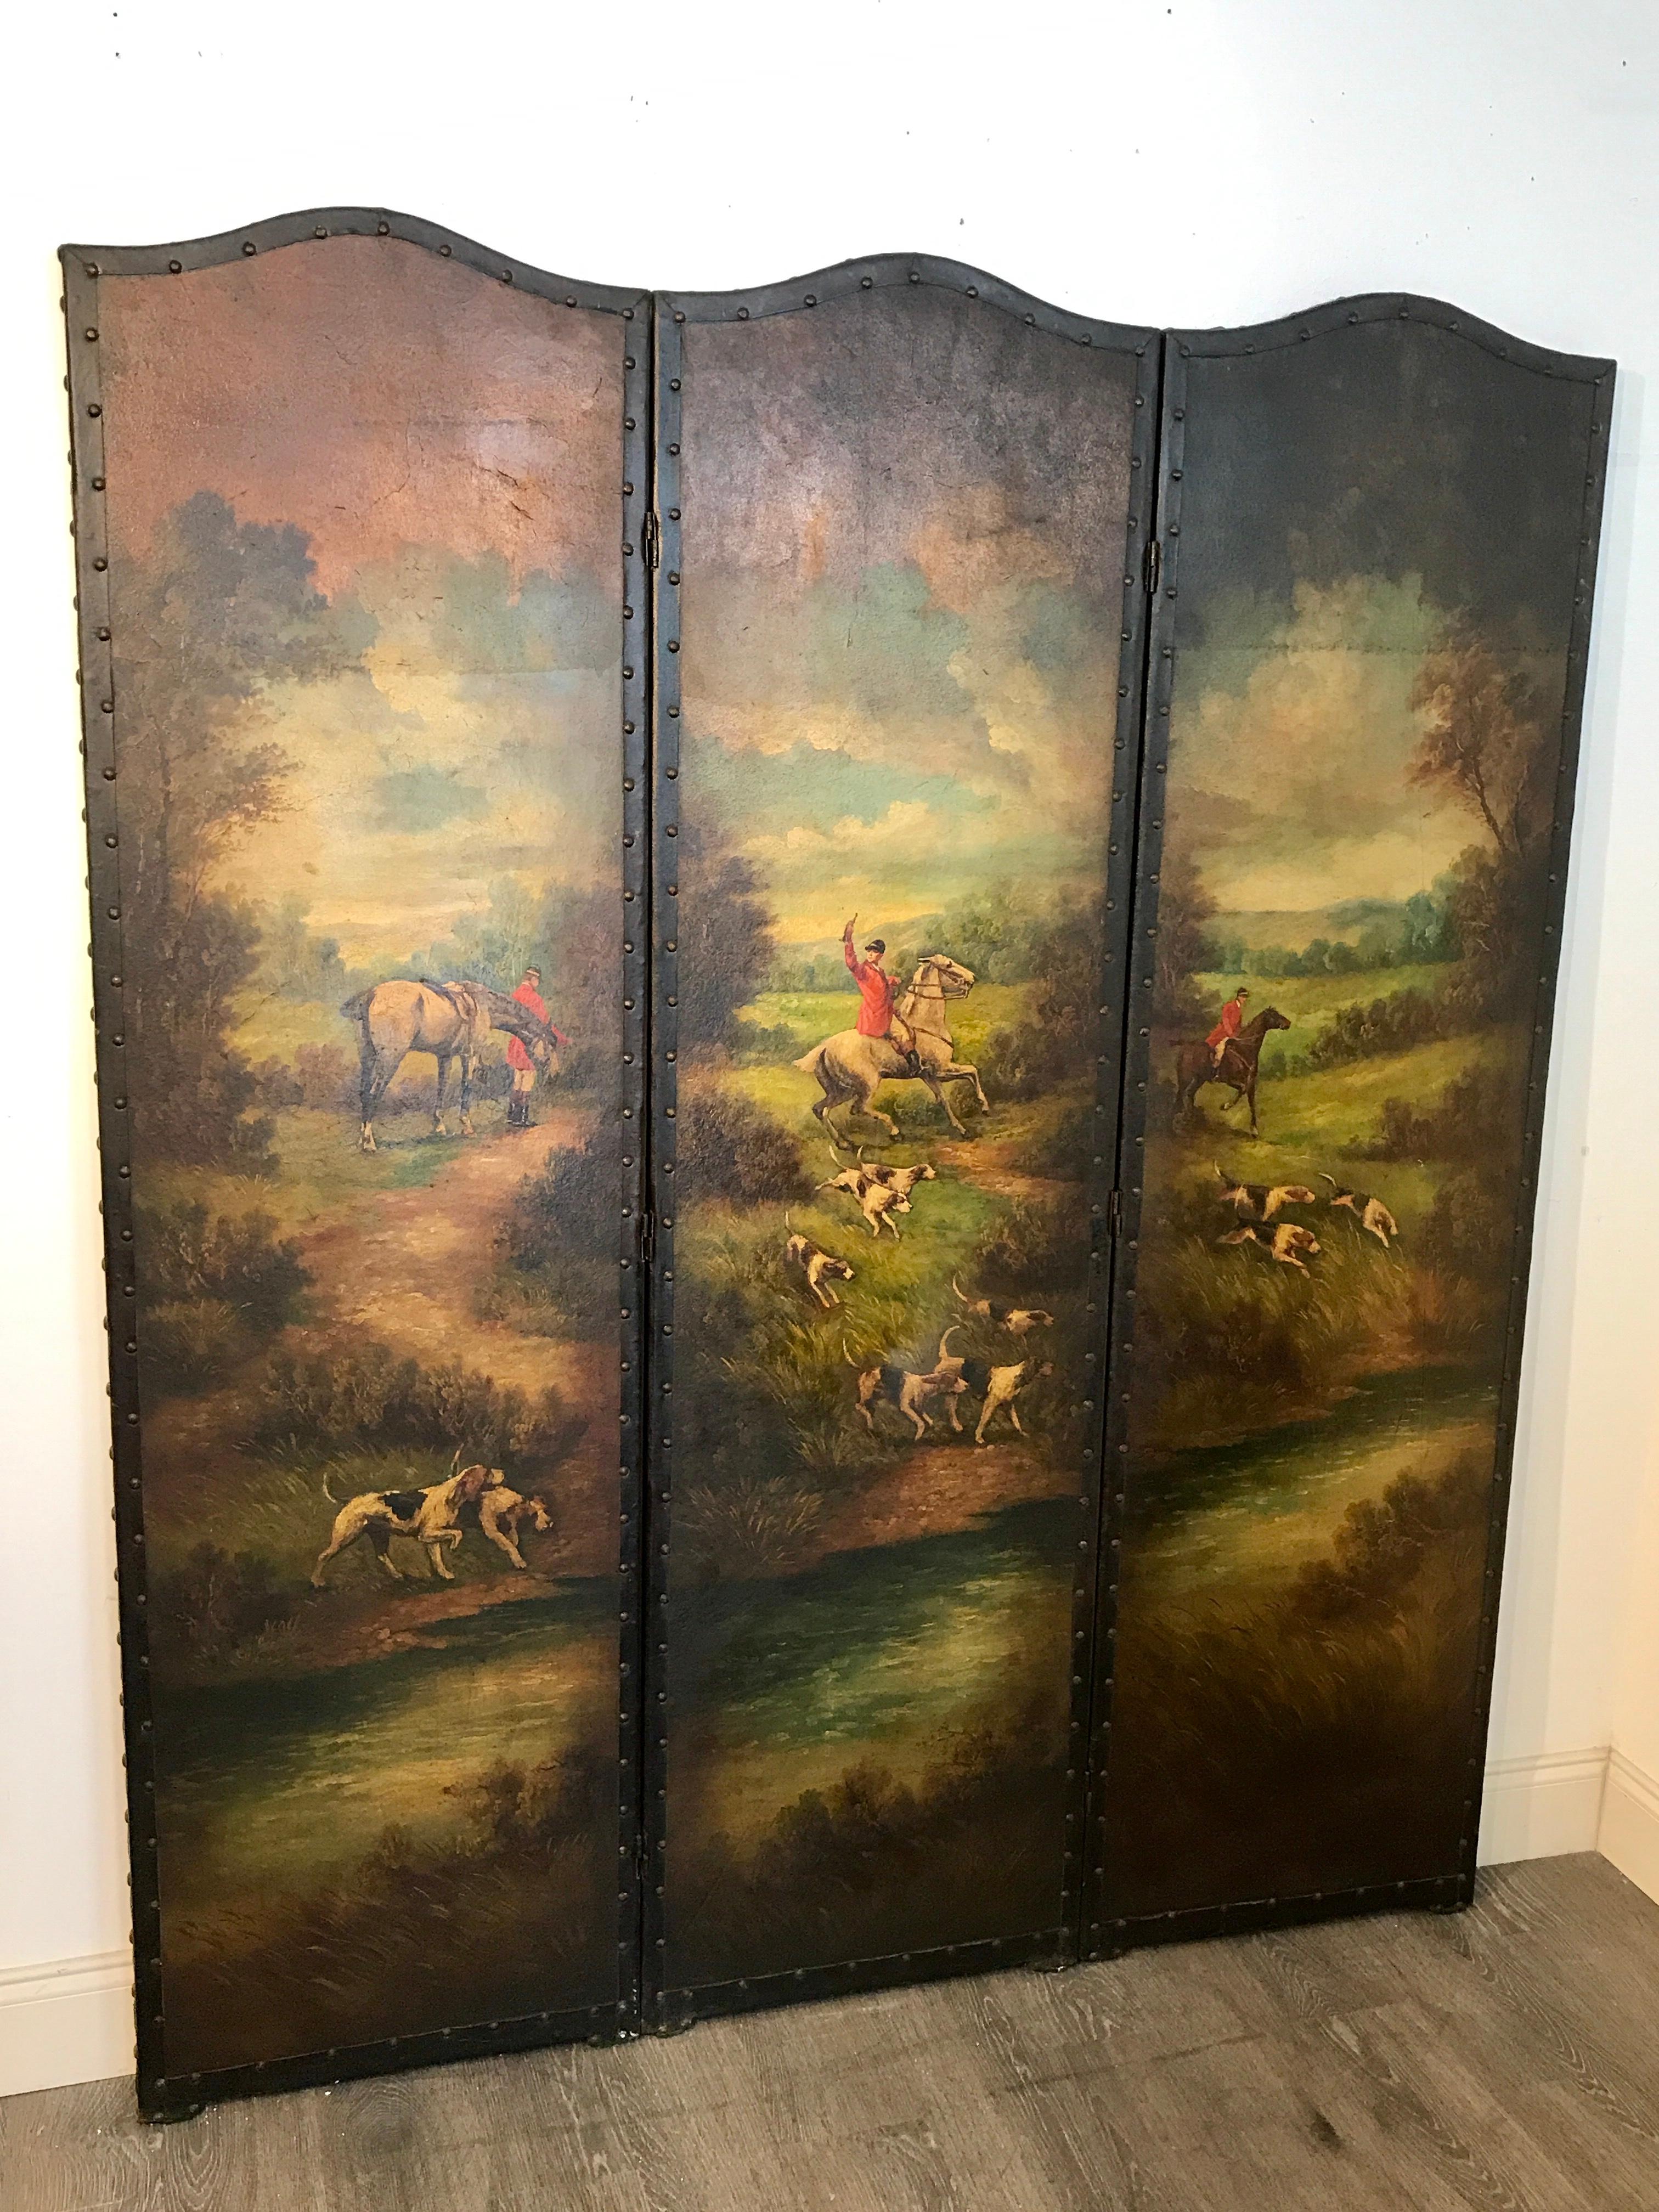 English leather hunting scene three panel screen, consisting of three well painted arched panels with hunting scenes and dogs, in well cared for antique condition, there is a slight blemish in the first panel to the left. On the back there is one